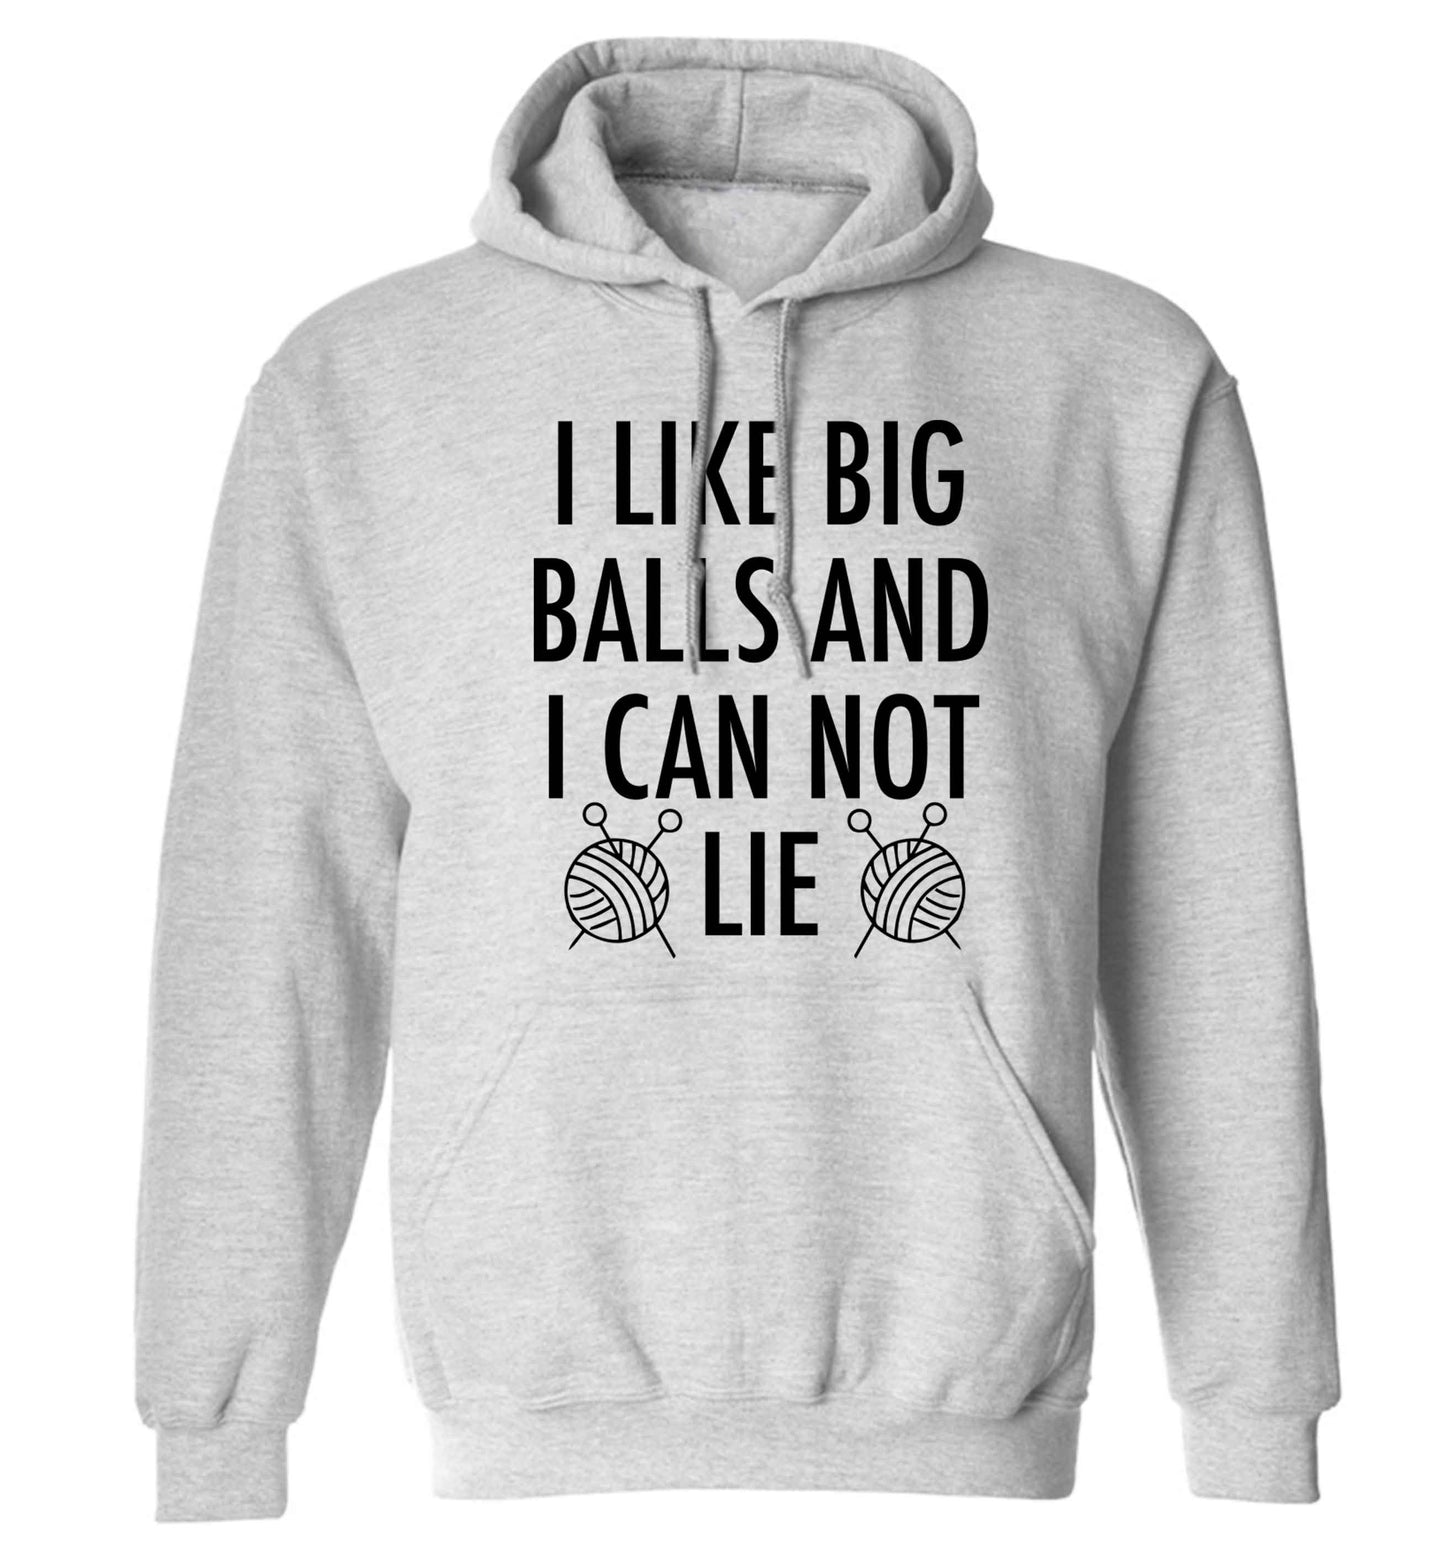 I like big balls and I can not lie adults unisex grey hoodie 2XL